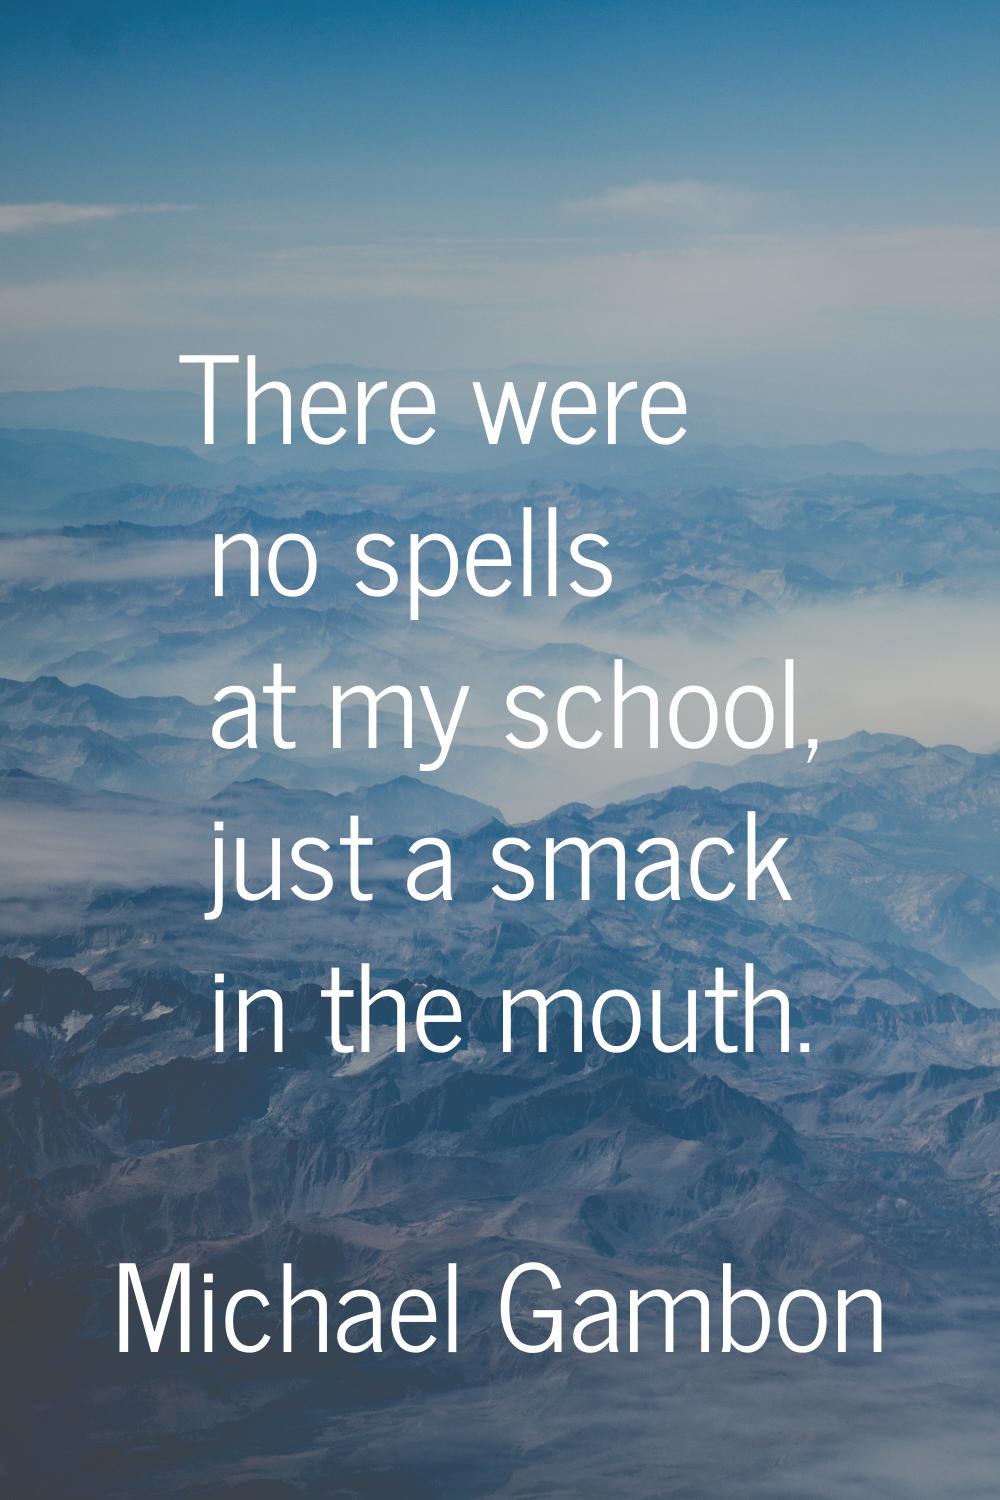 There were no spells at my school, just a smack in the mouth.